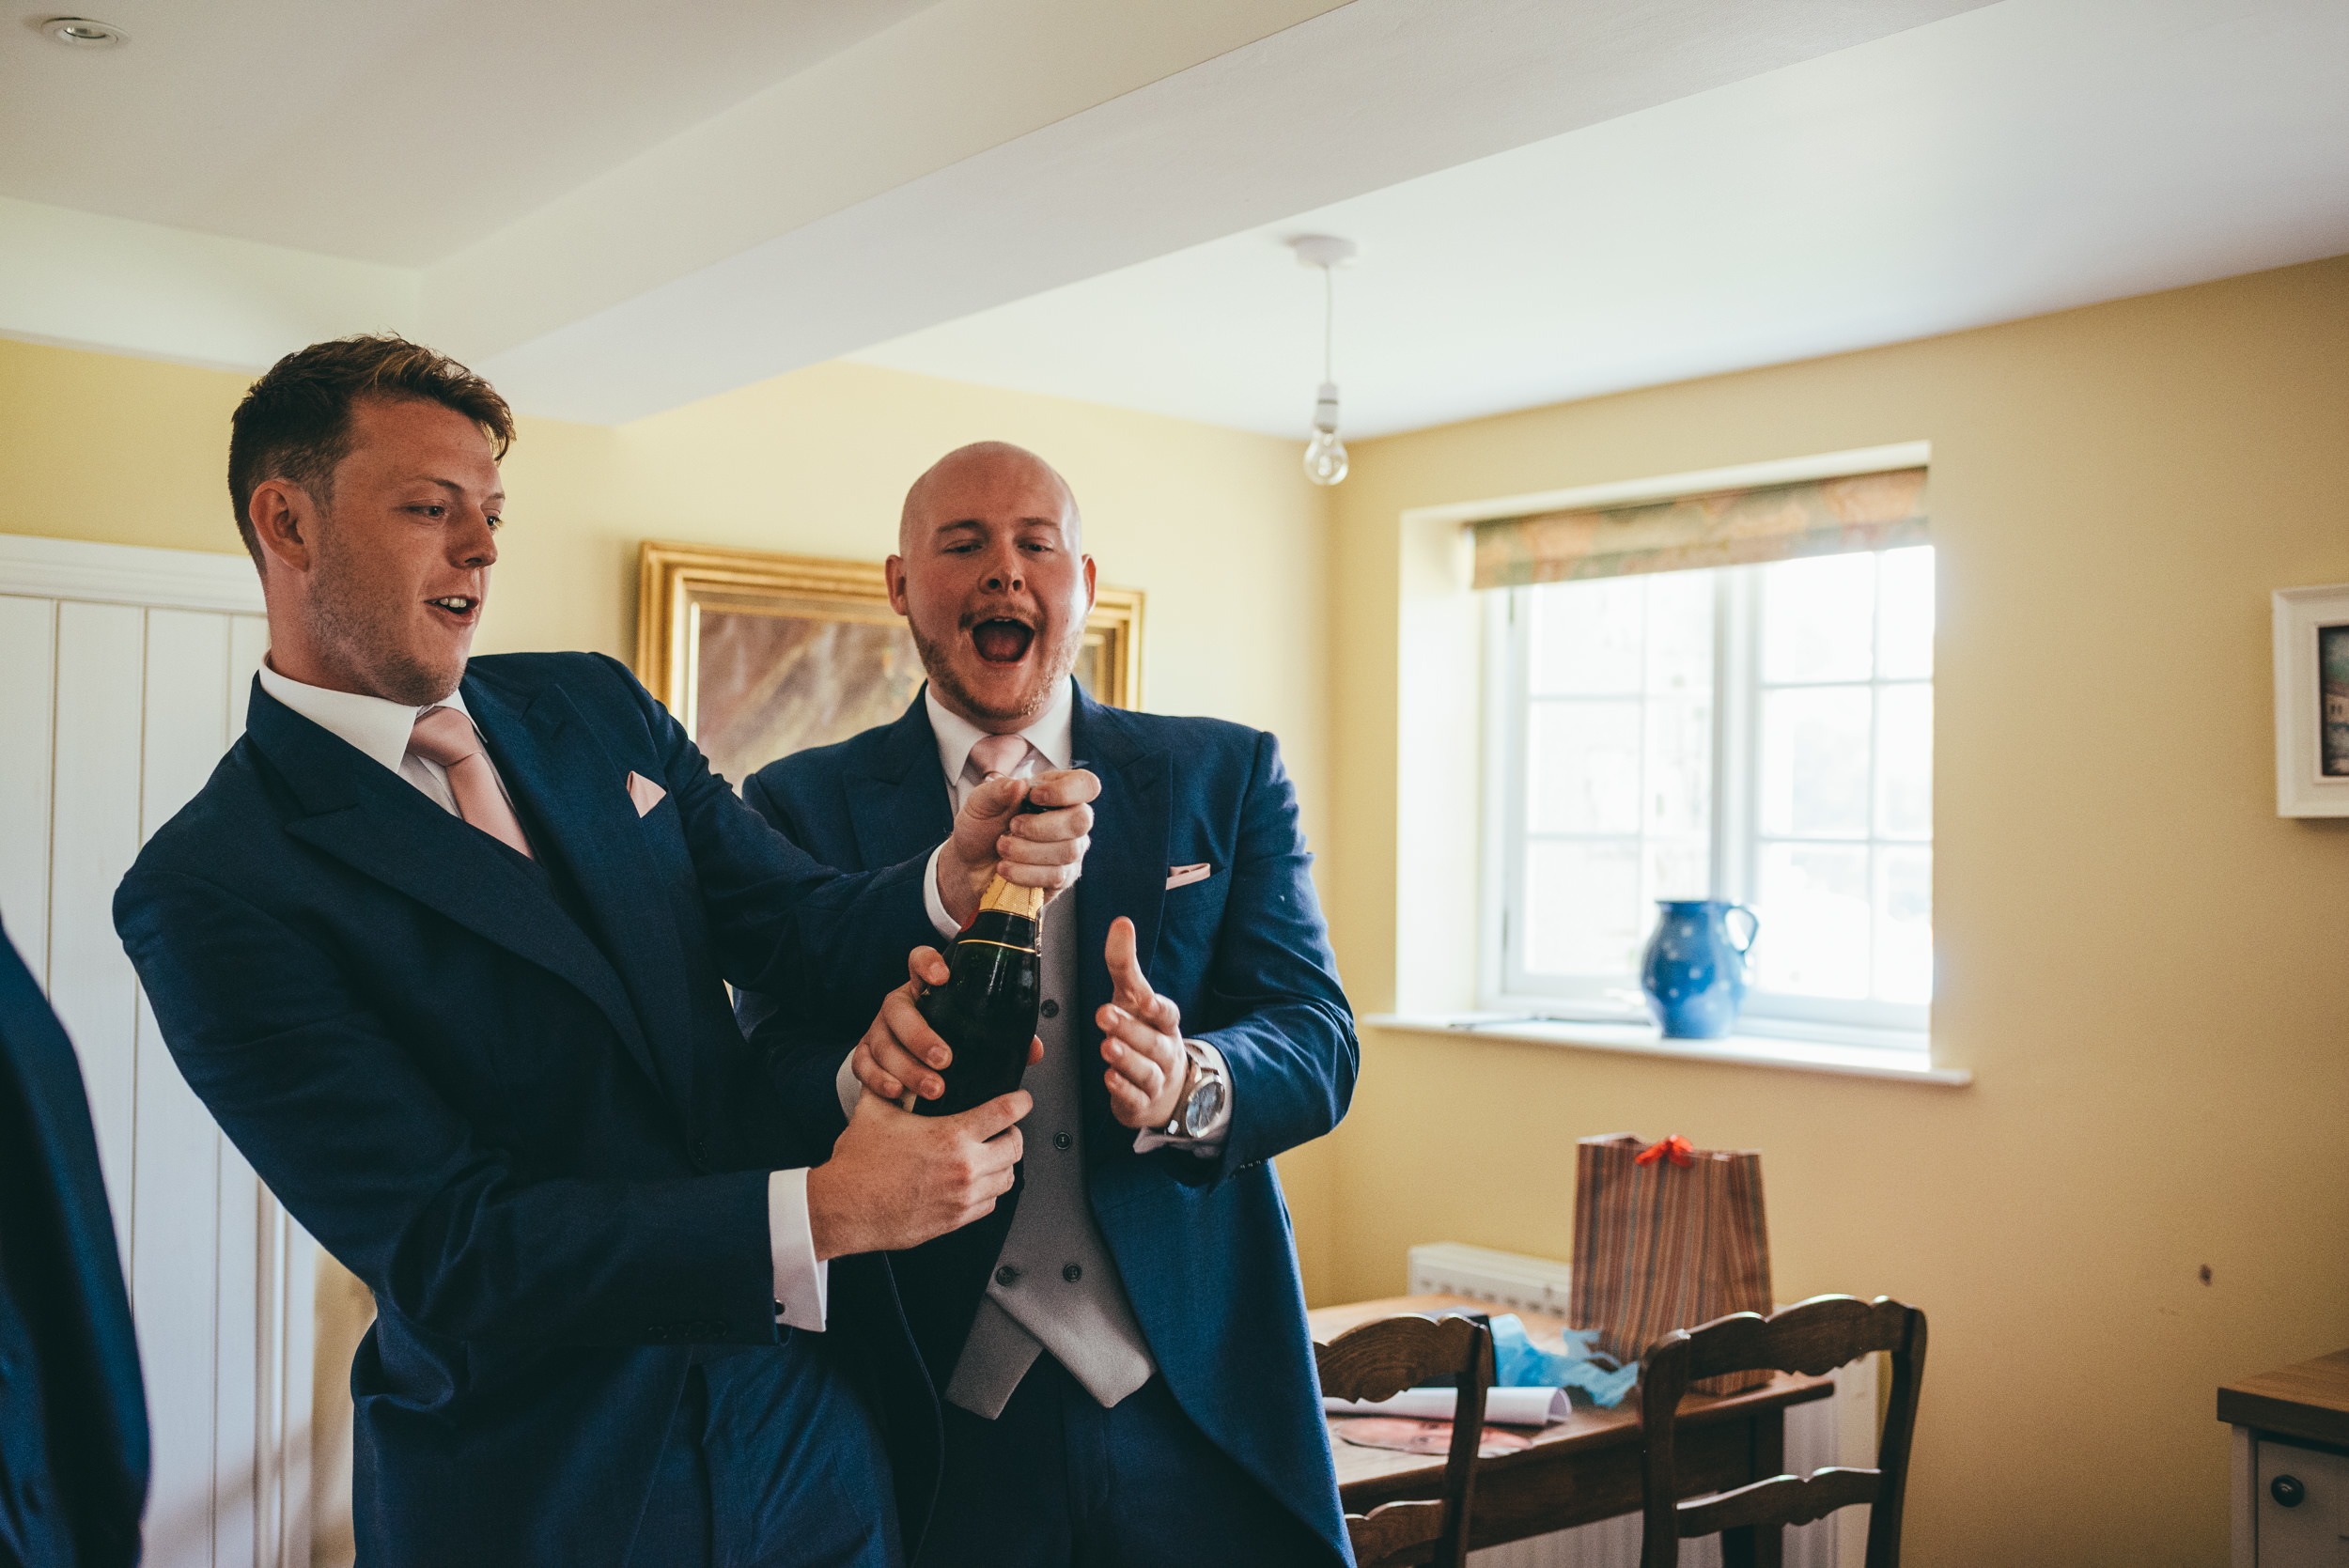 bestman opening a bottle of champagne